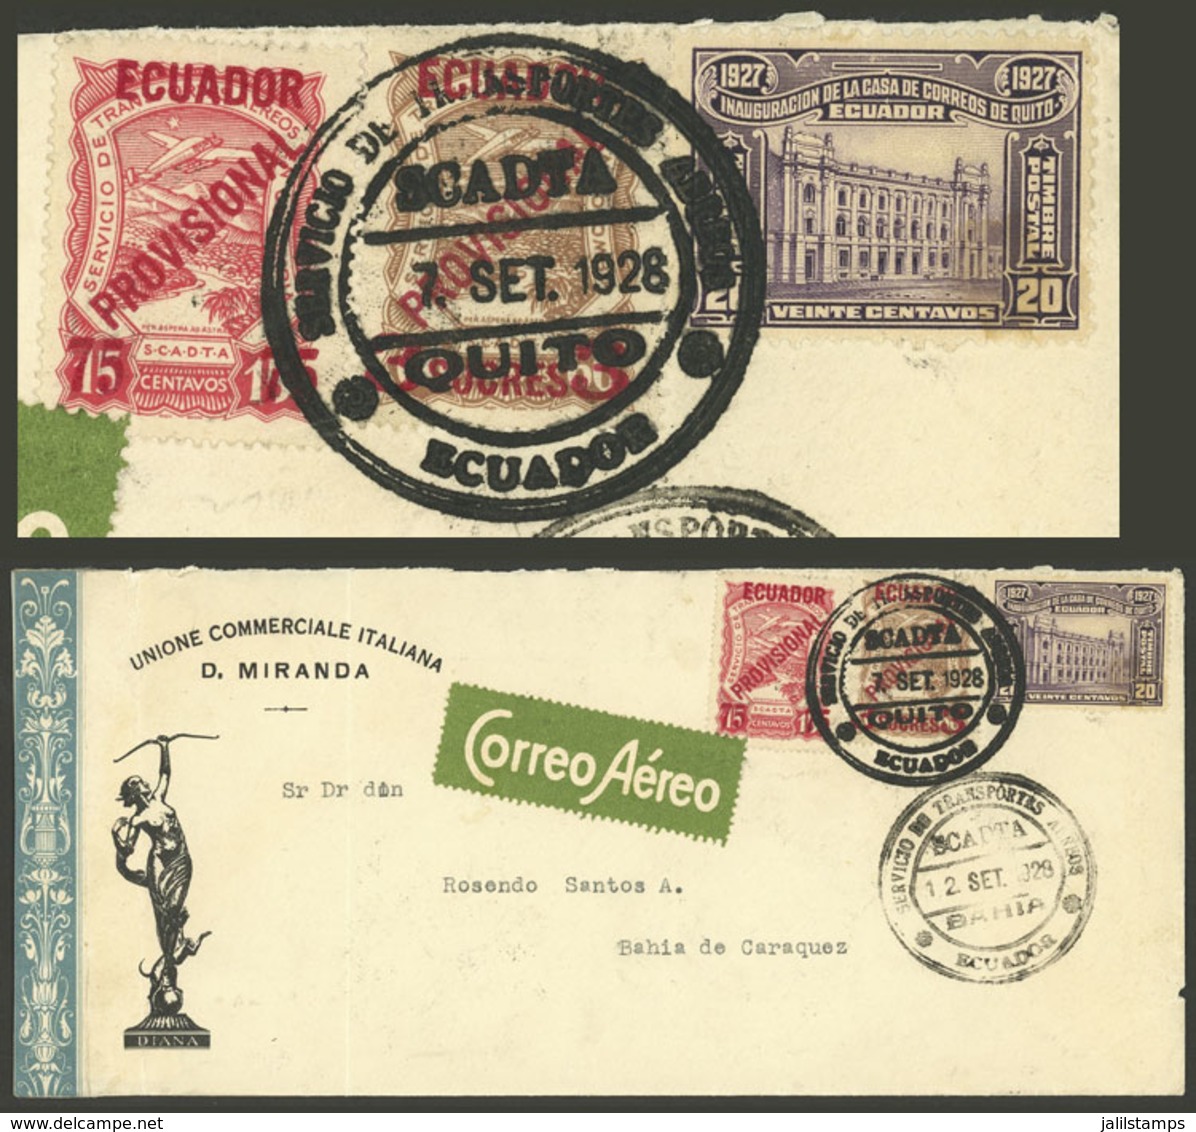 ECUADOR: Yv.2 + 5, Cover Franked With Definitive Stamp Of 20c. To Pay The Surface Rate + 3.75S. (Yvert 2 + 5) Paying The - Ecuador